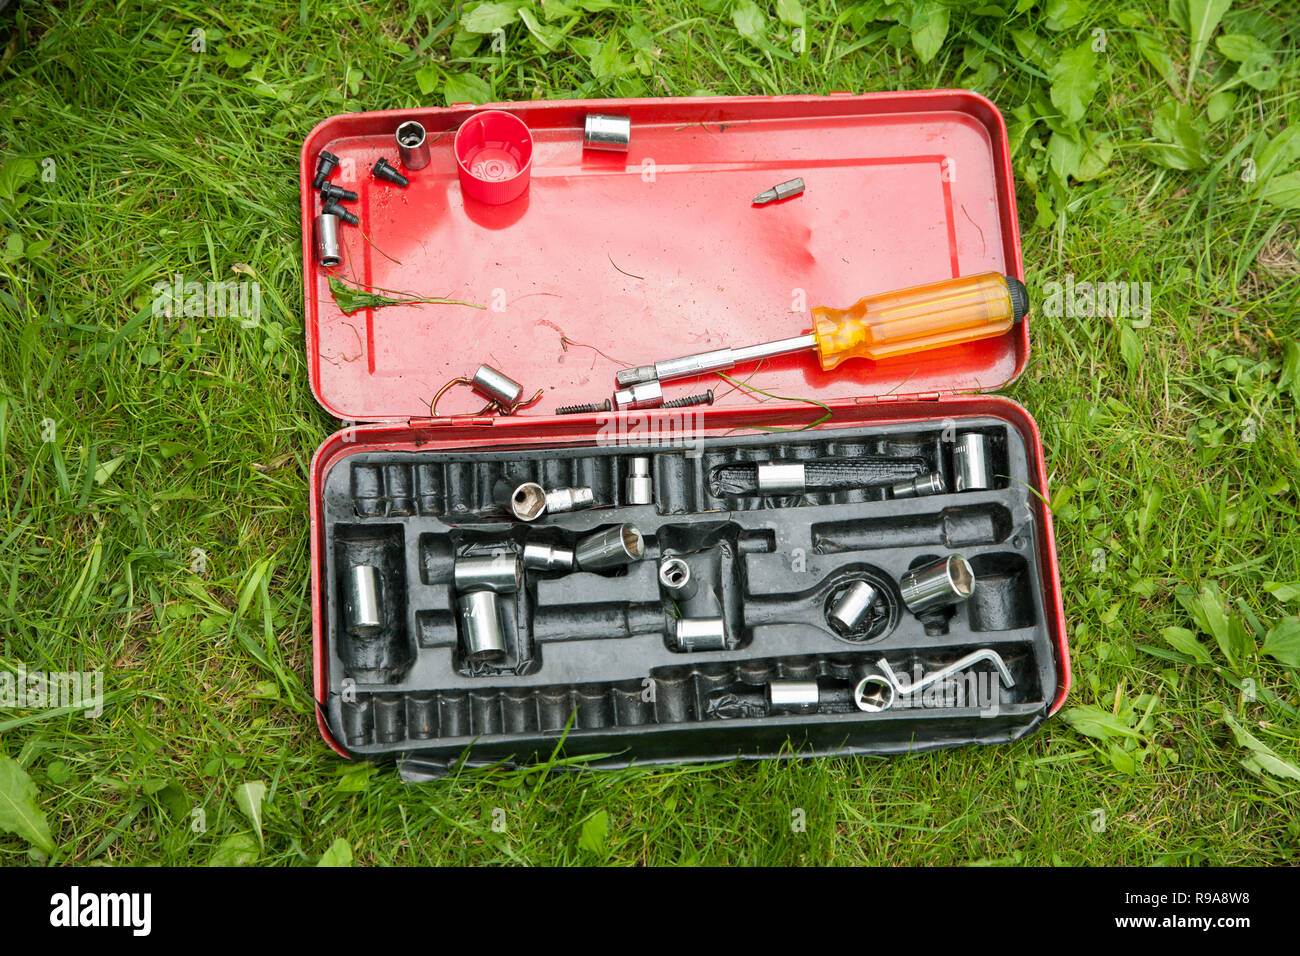 screwdrivers in a red metal box on the grass Stock Photo